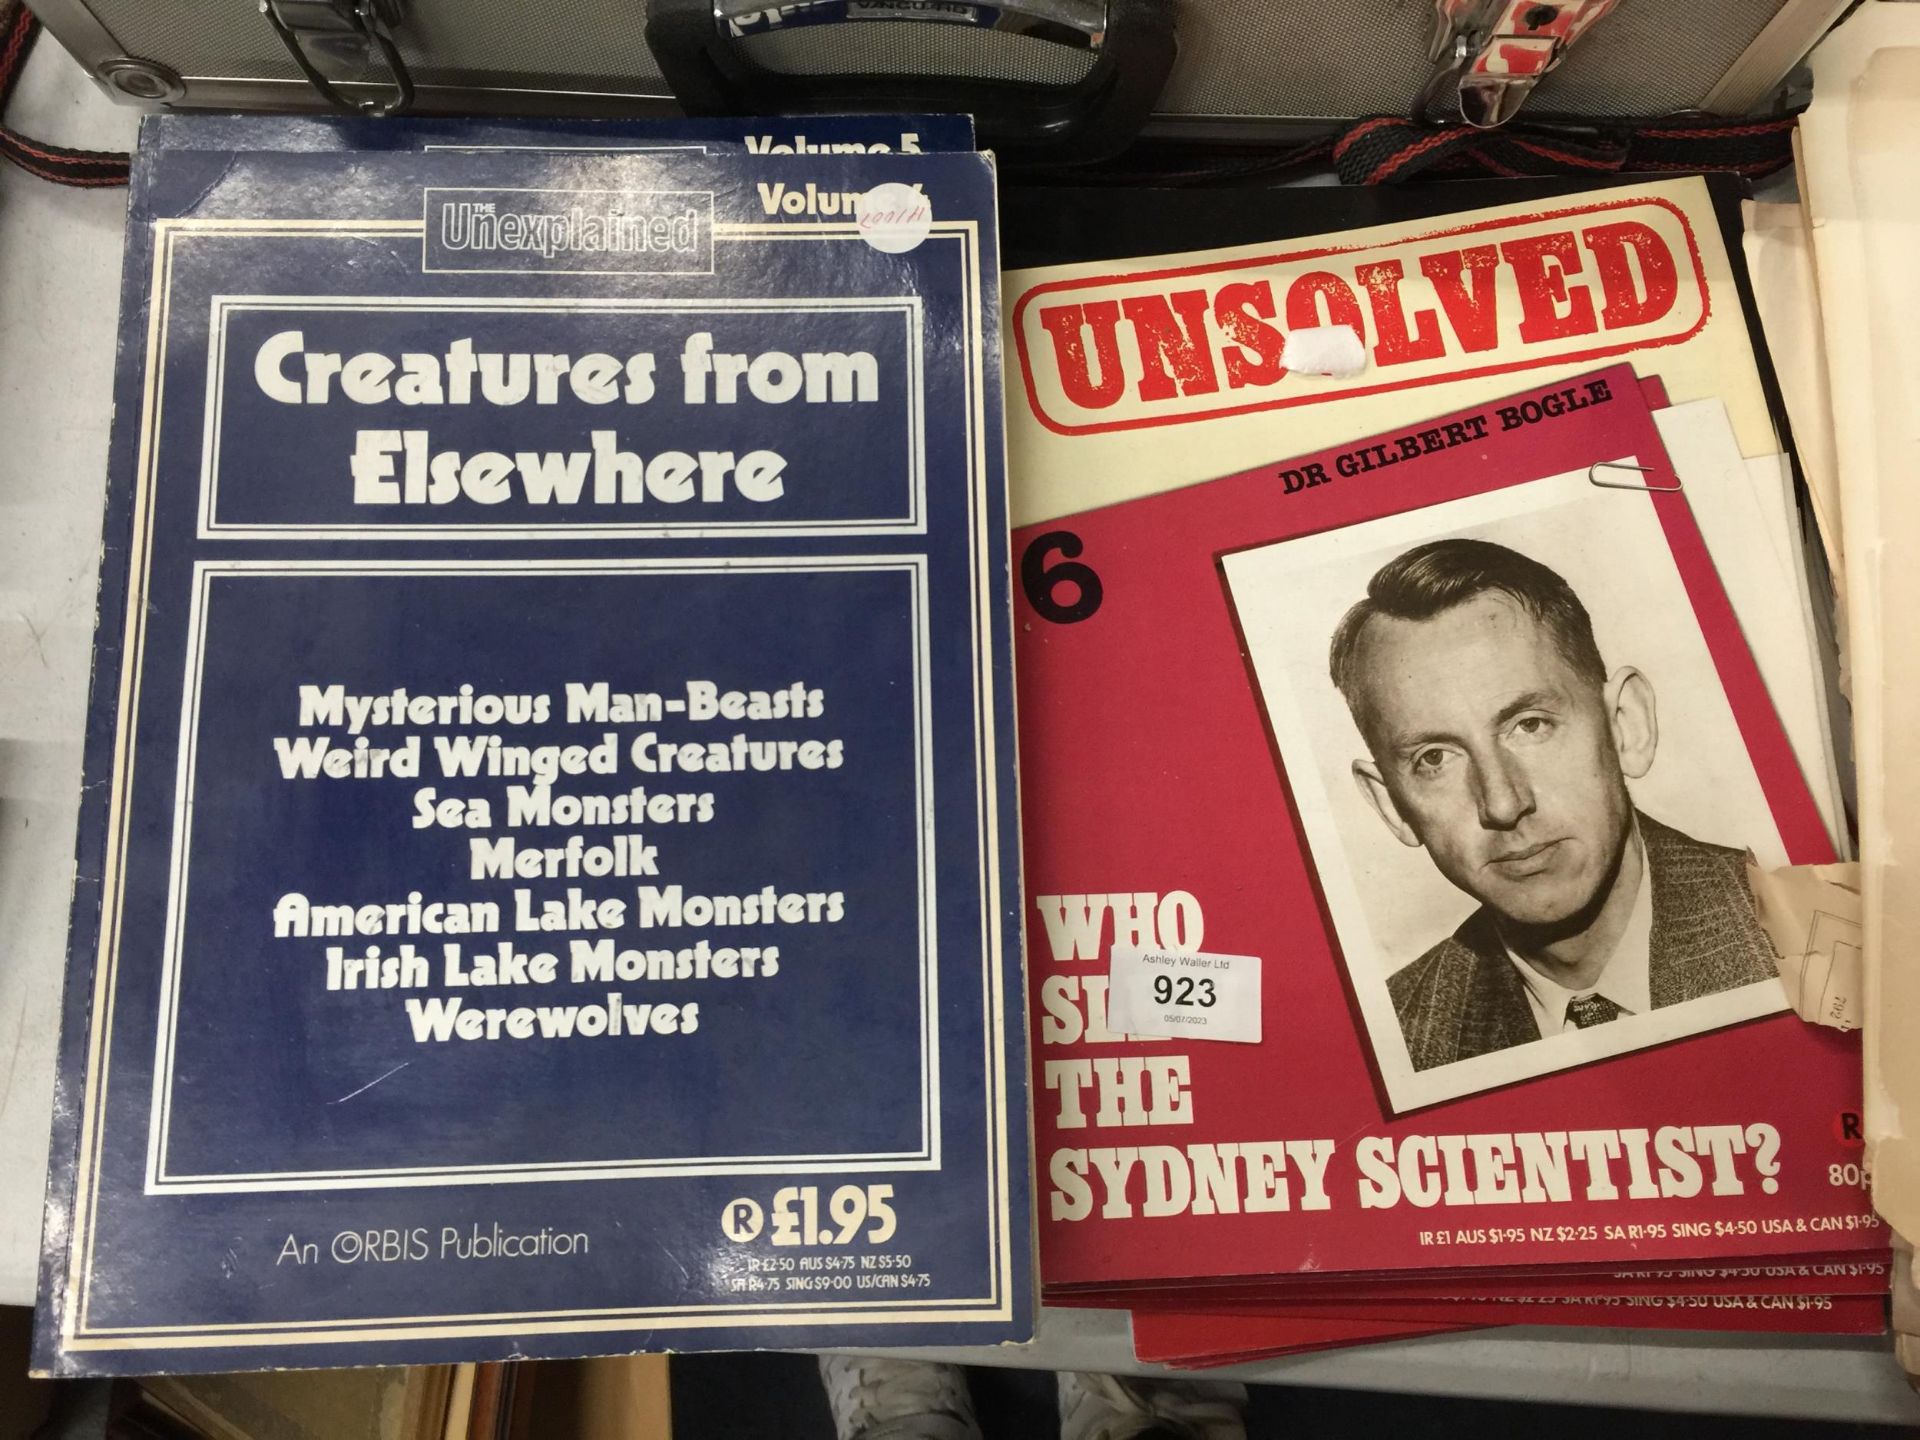 A QUANTITY OF 'THE UNEXPLAINED' AND 'UNSOLVED' MAGAZINES